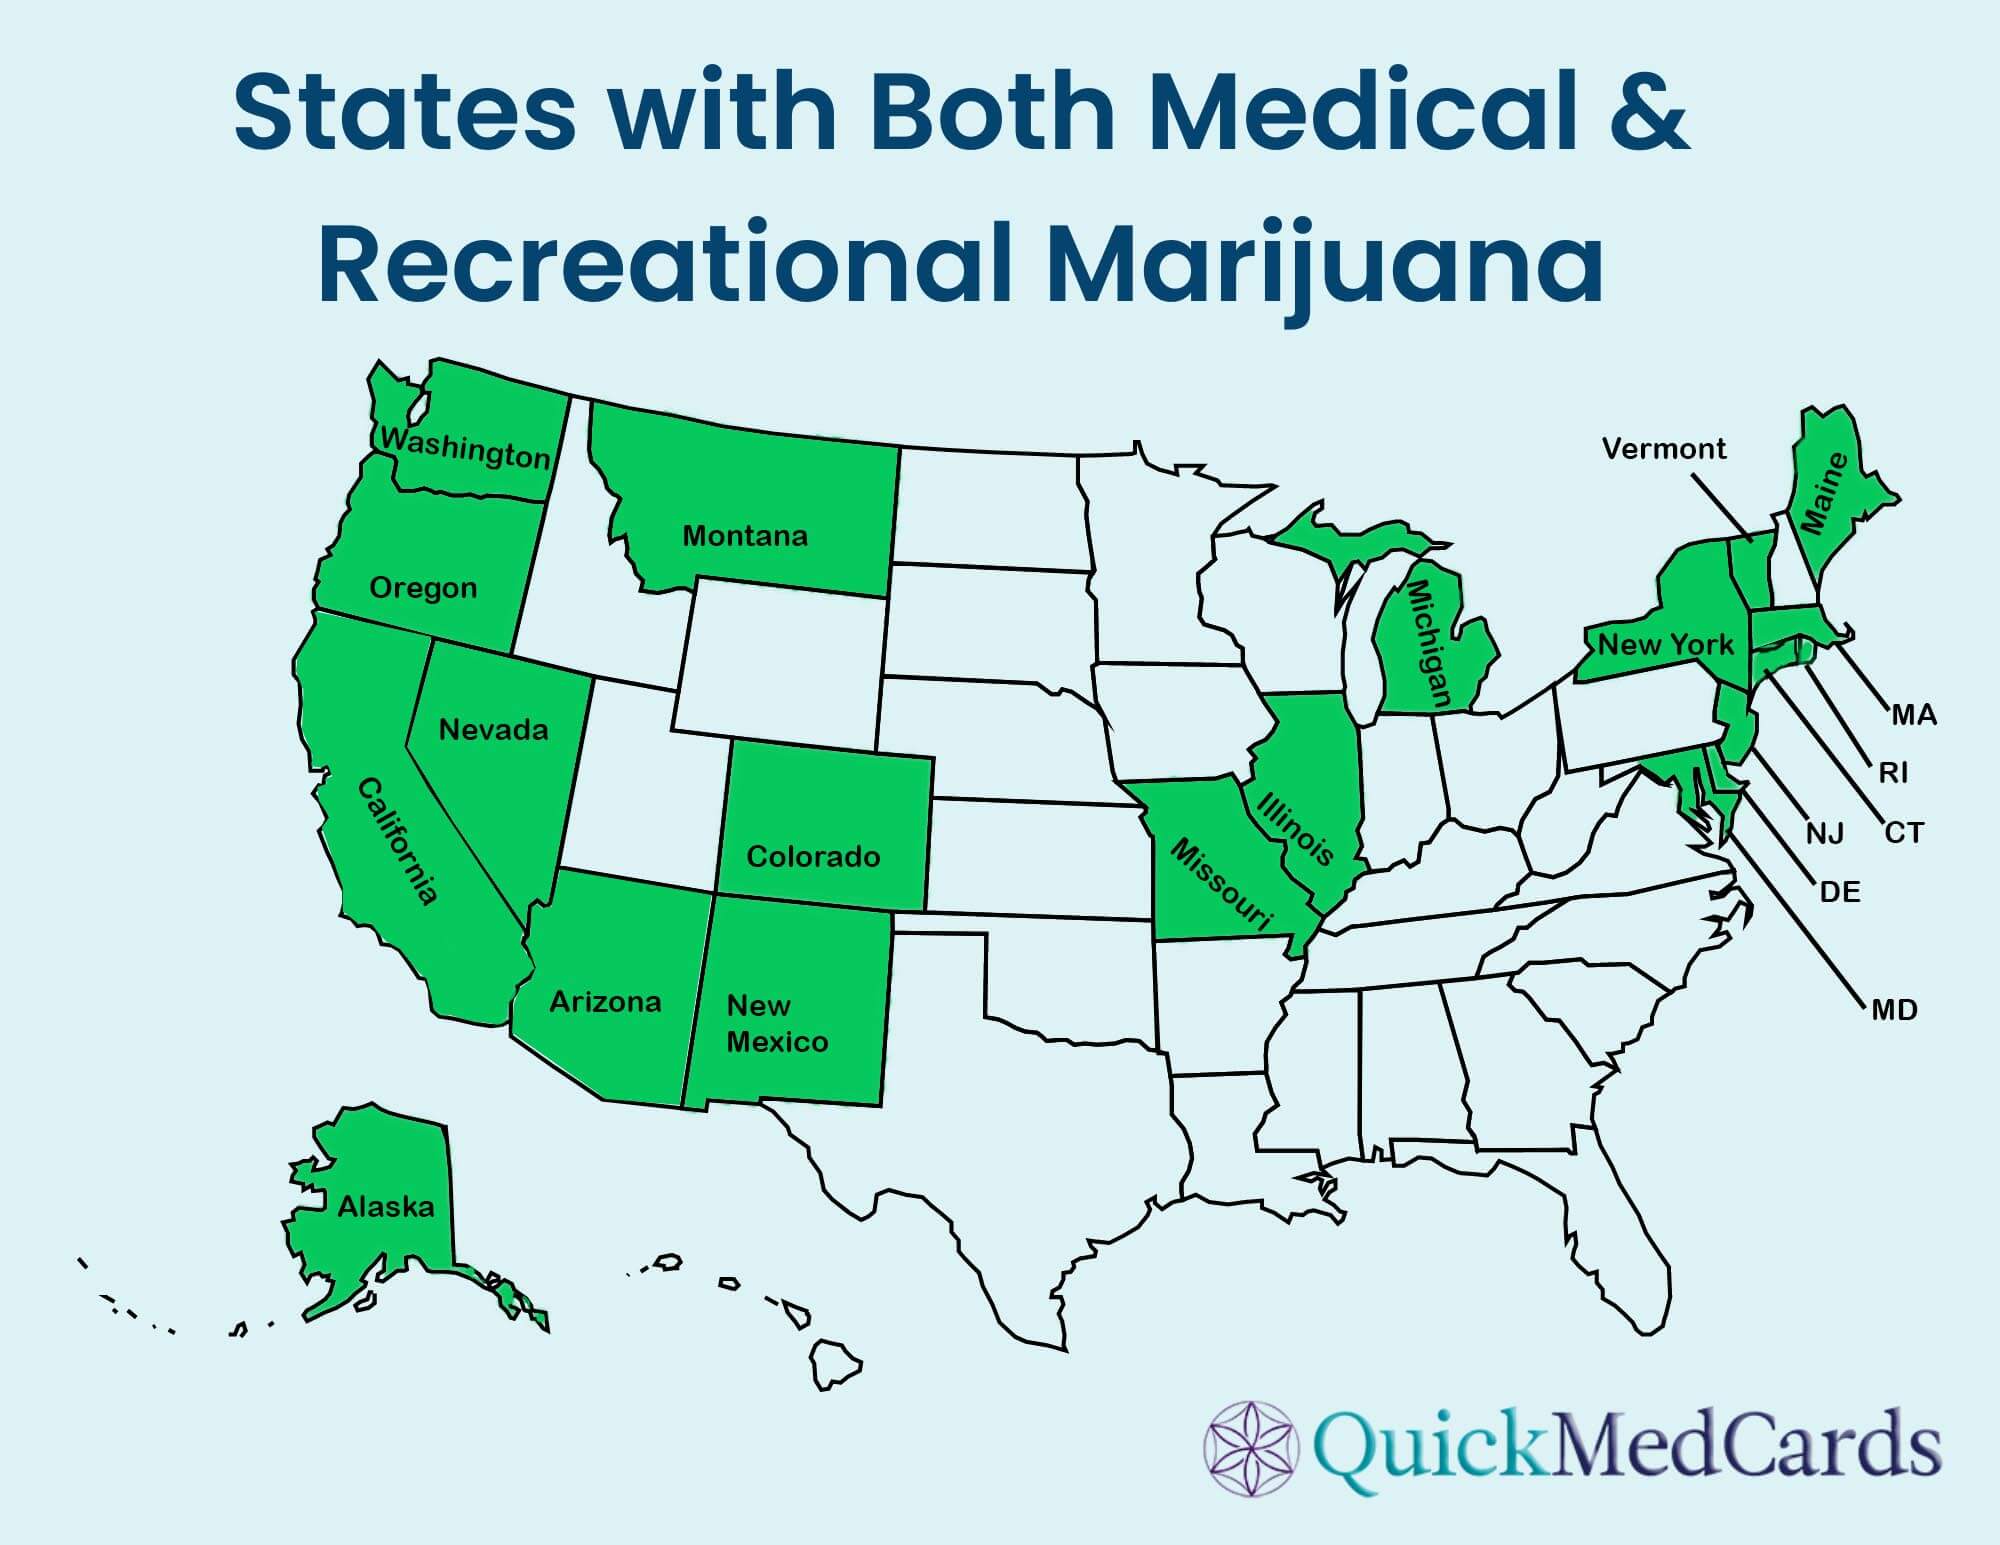 A map showing states that have legalized both medical and recreational marijuana